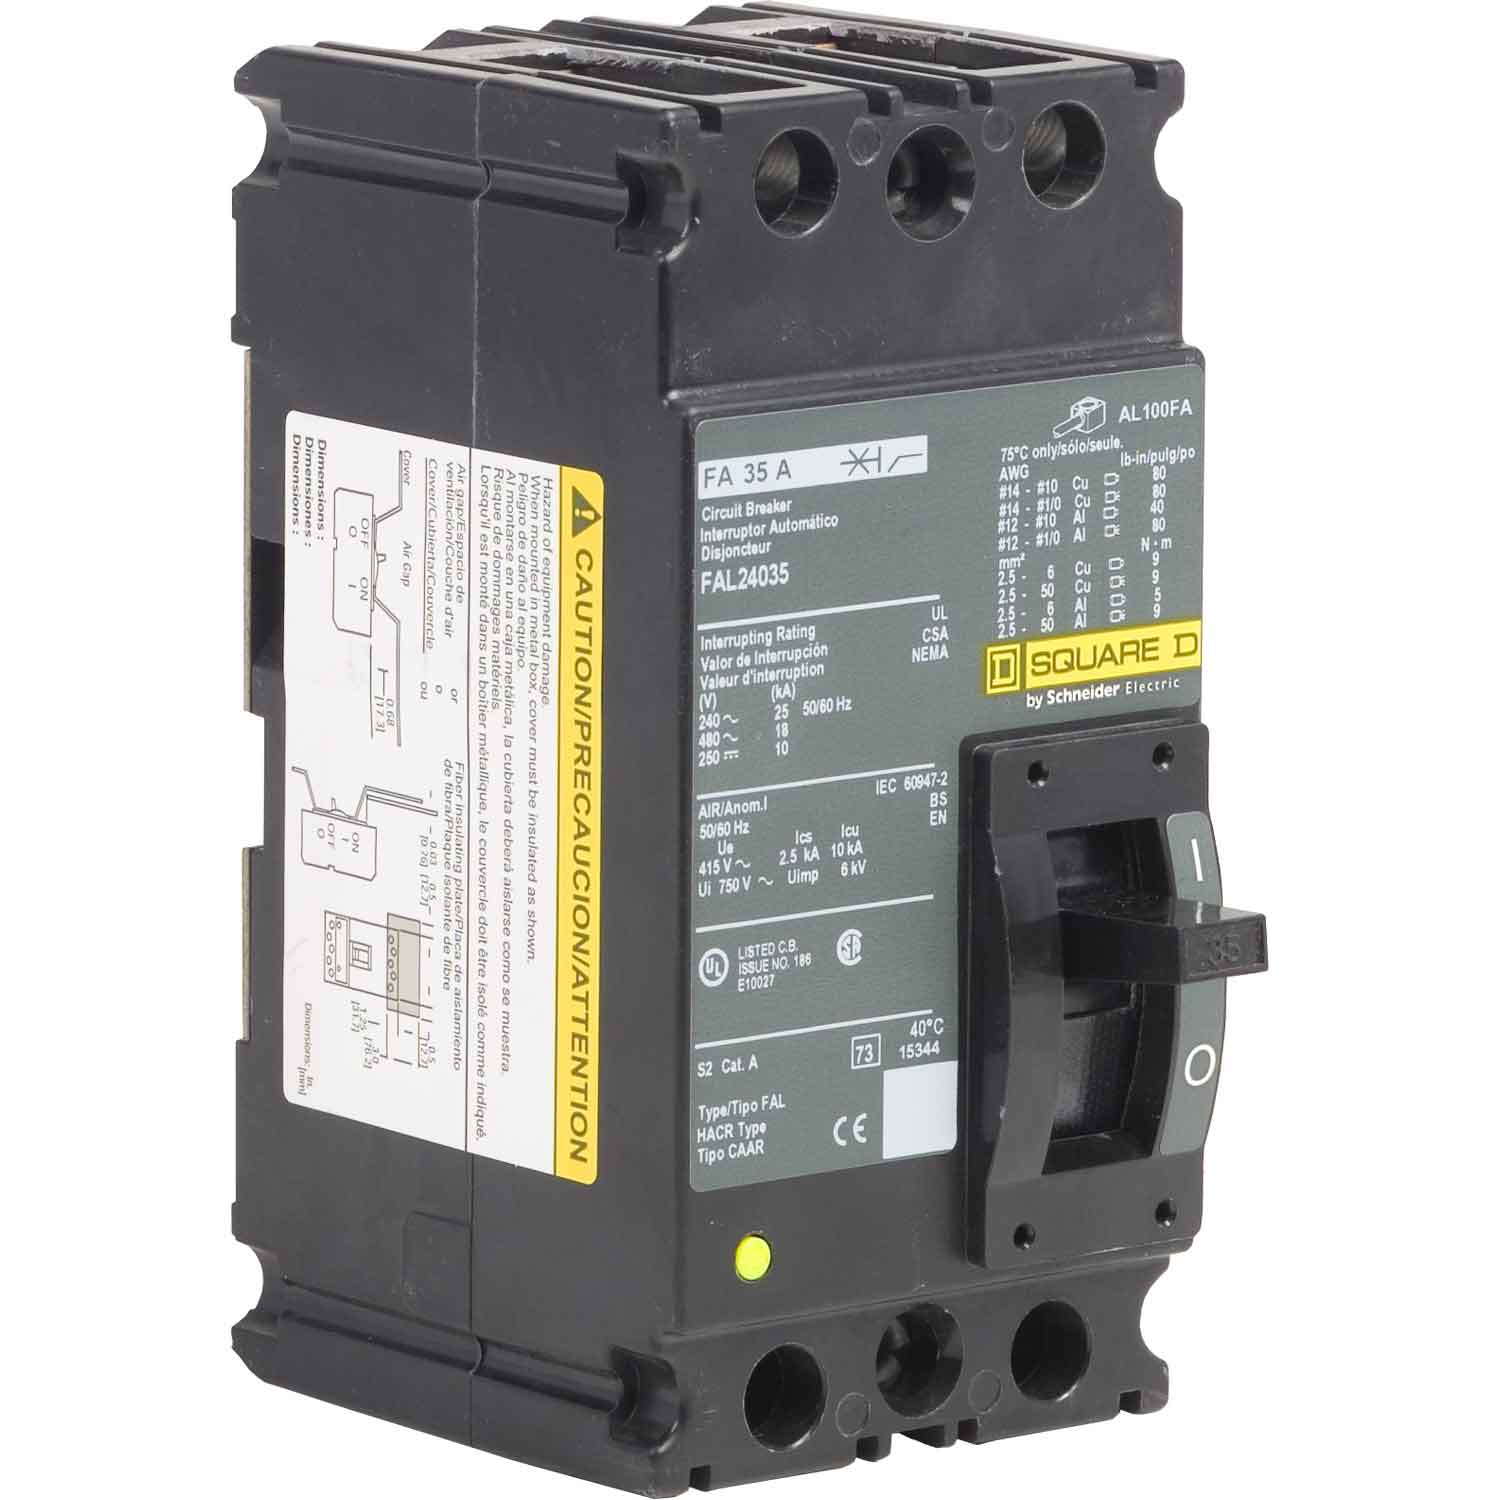 FAL24035 - Square D - Molded Case Circuit Breakers